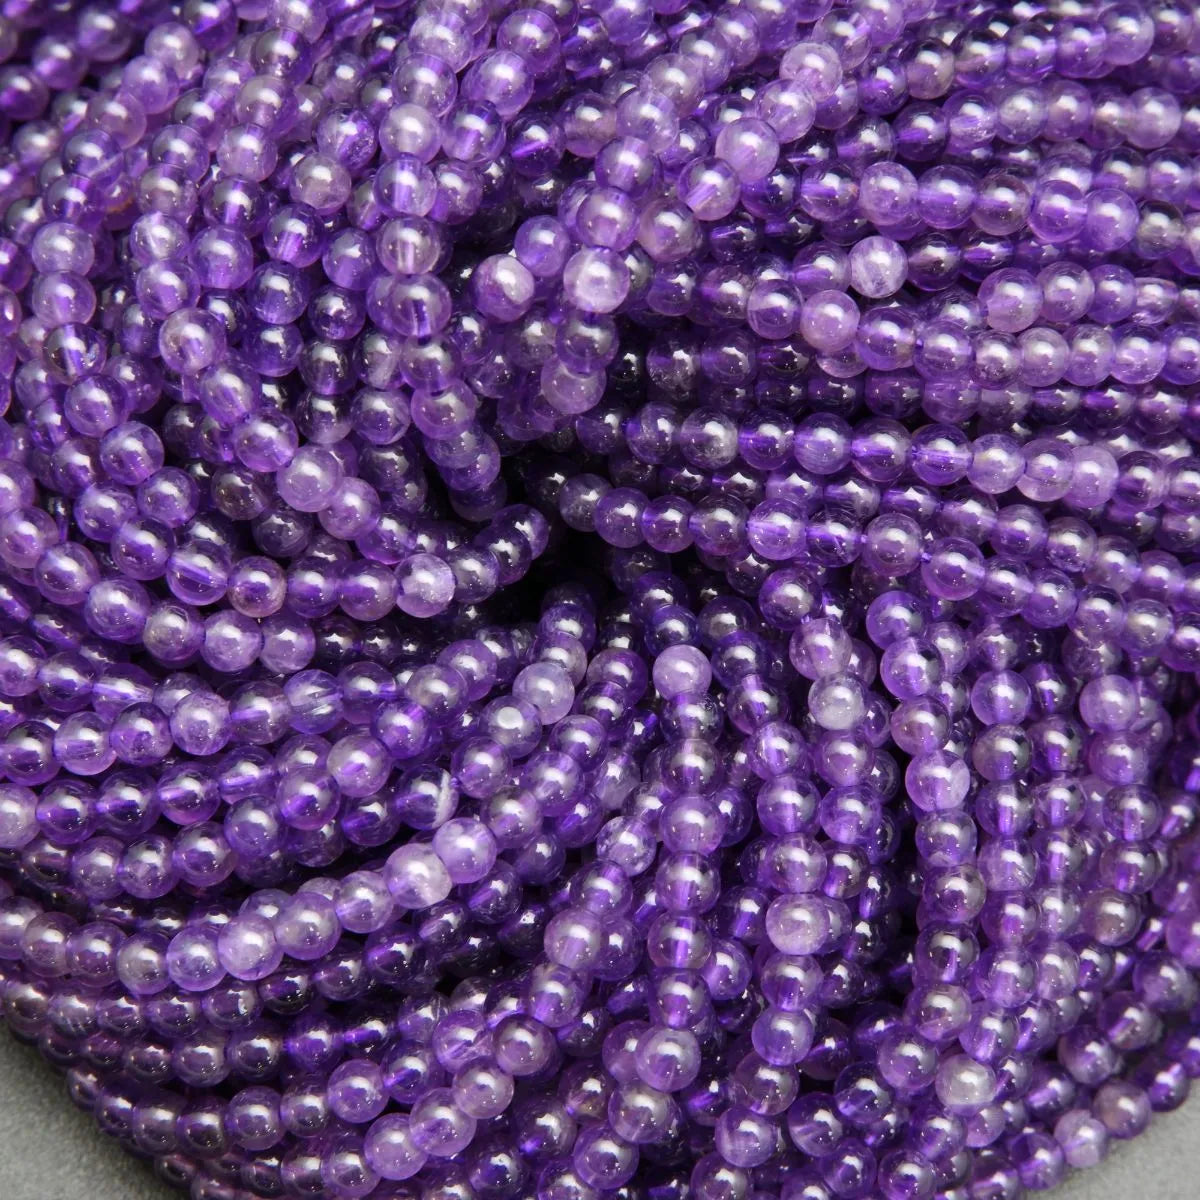 Natural Cape Amethyst Beads 6mm 8mm 10mm 12mm Round Beads White